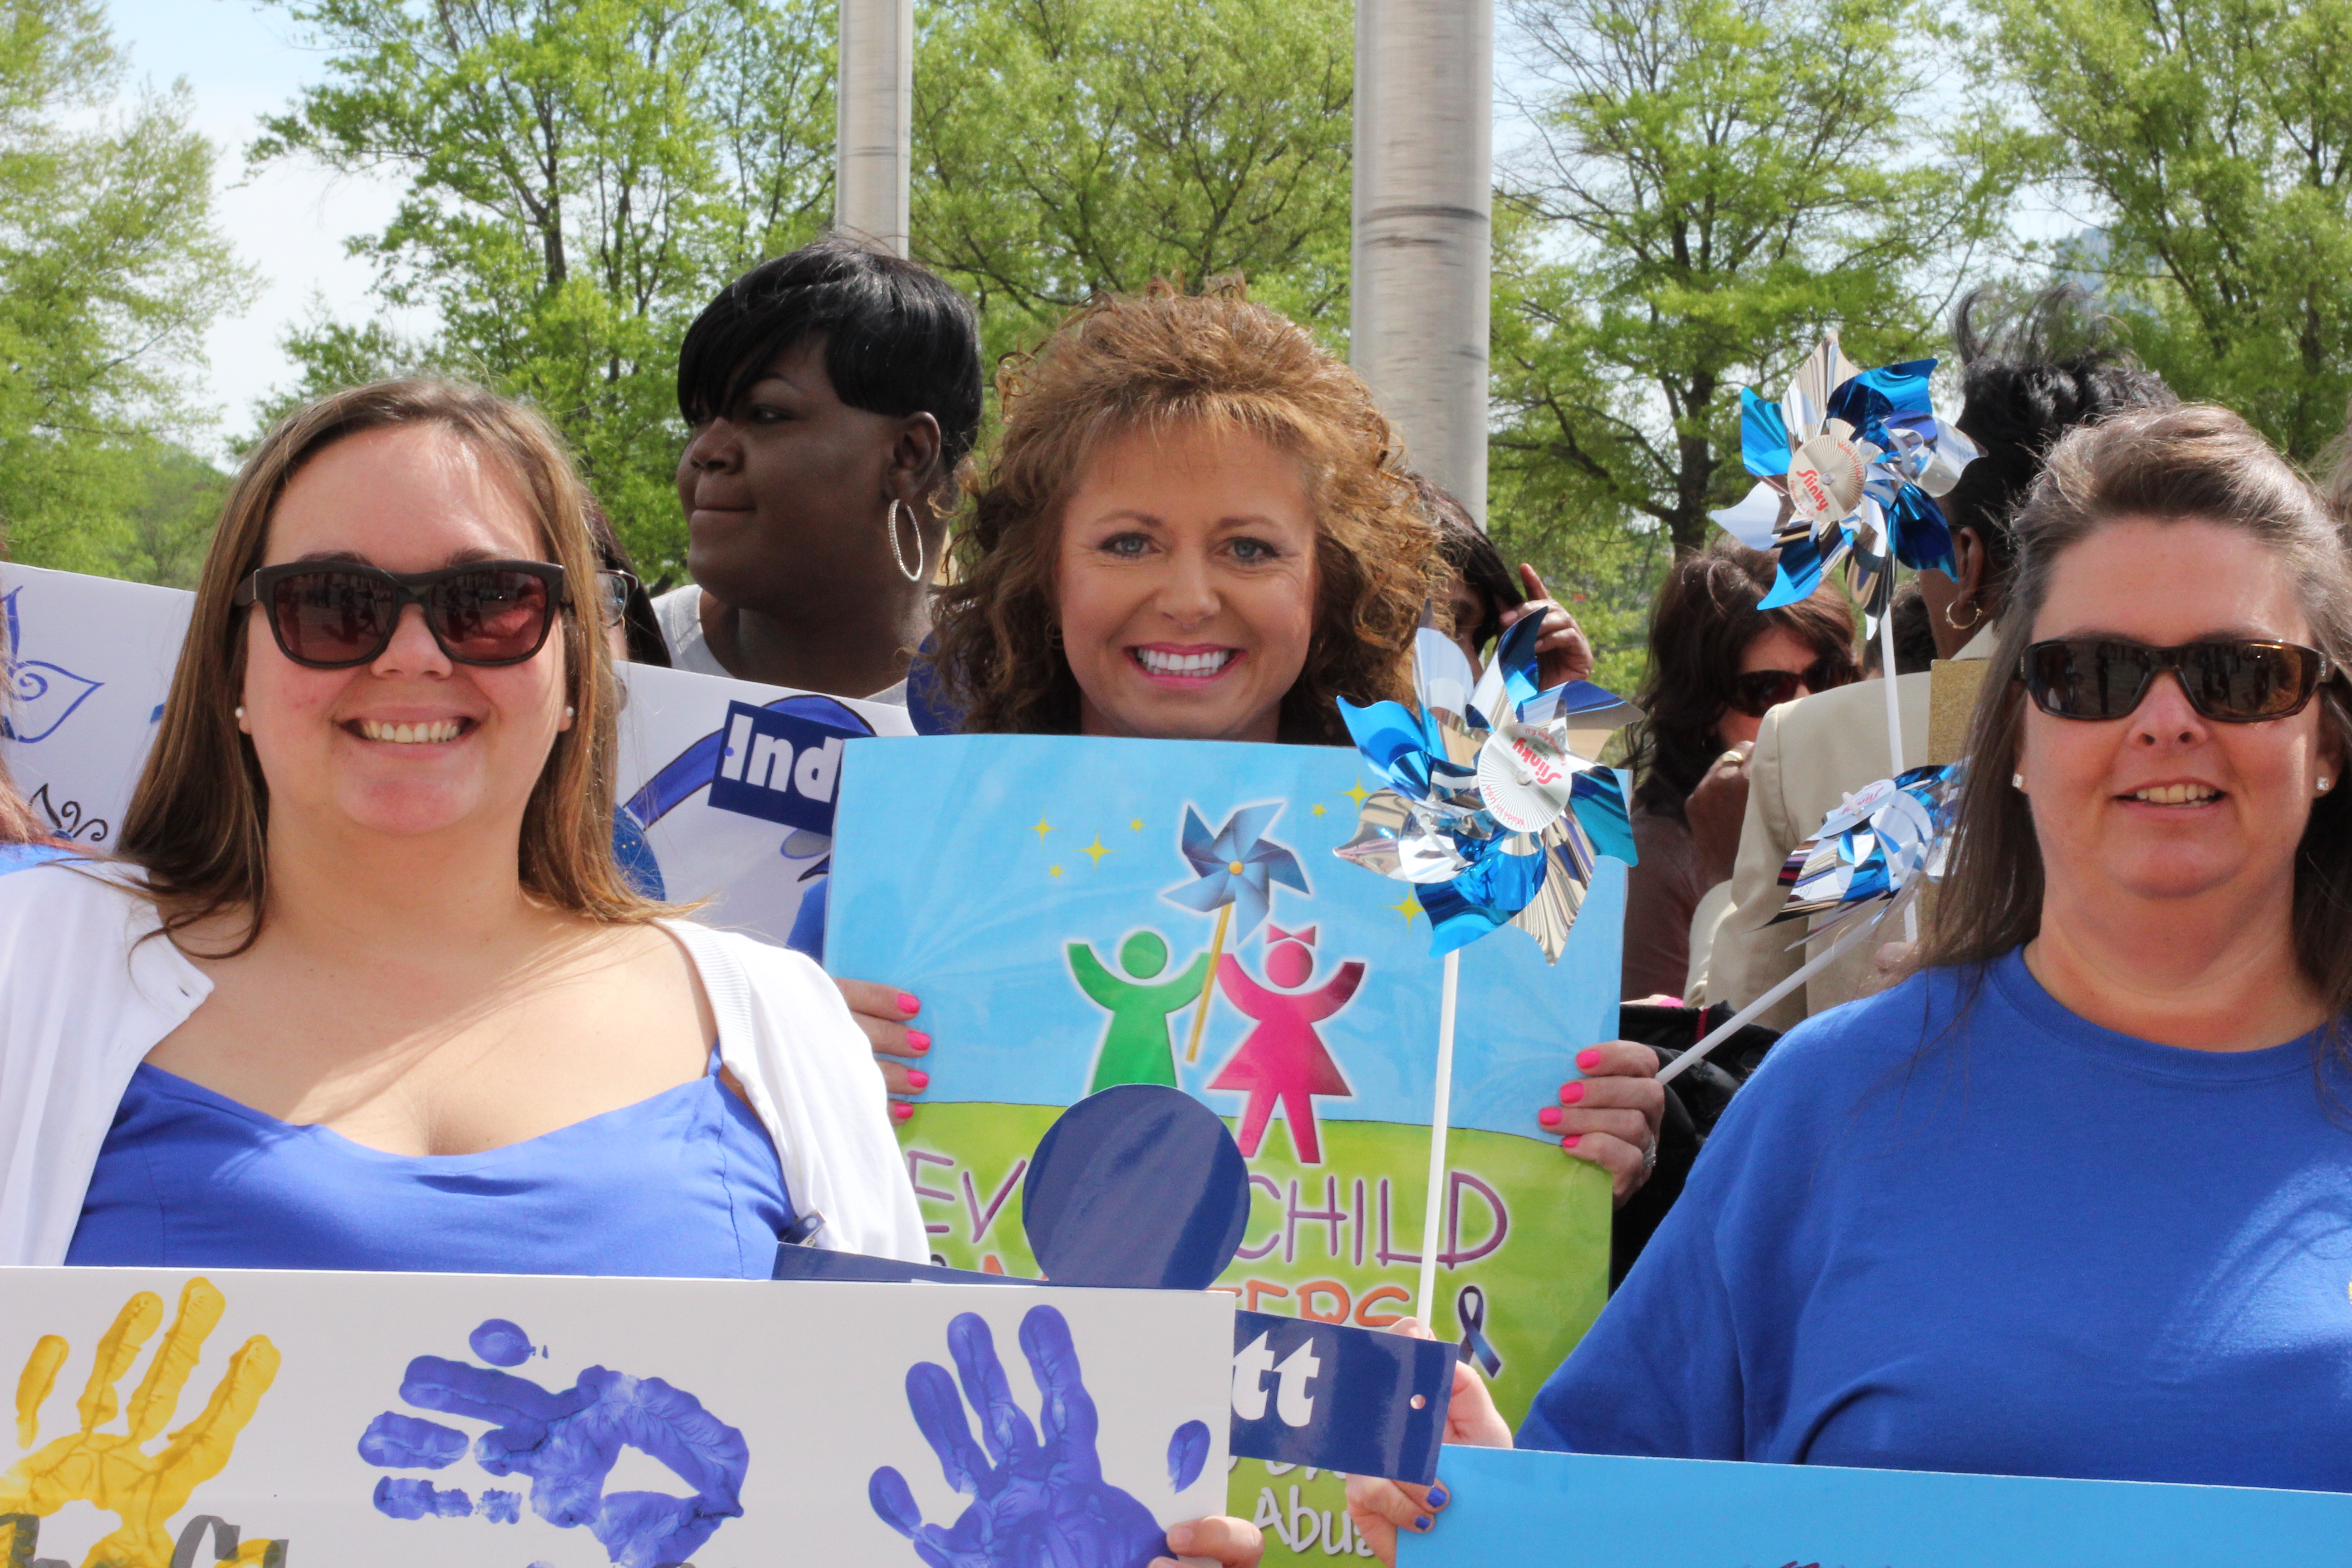 Child Abuse Prevention Rally 2015